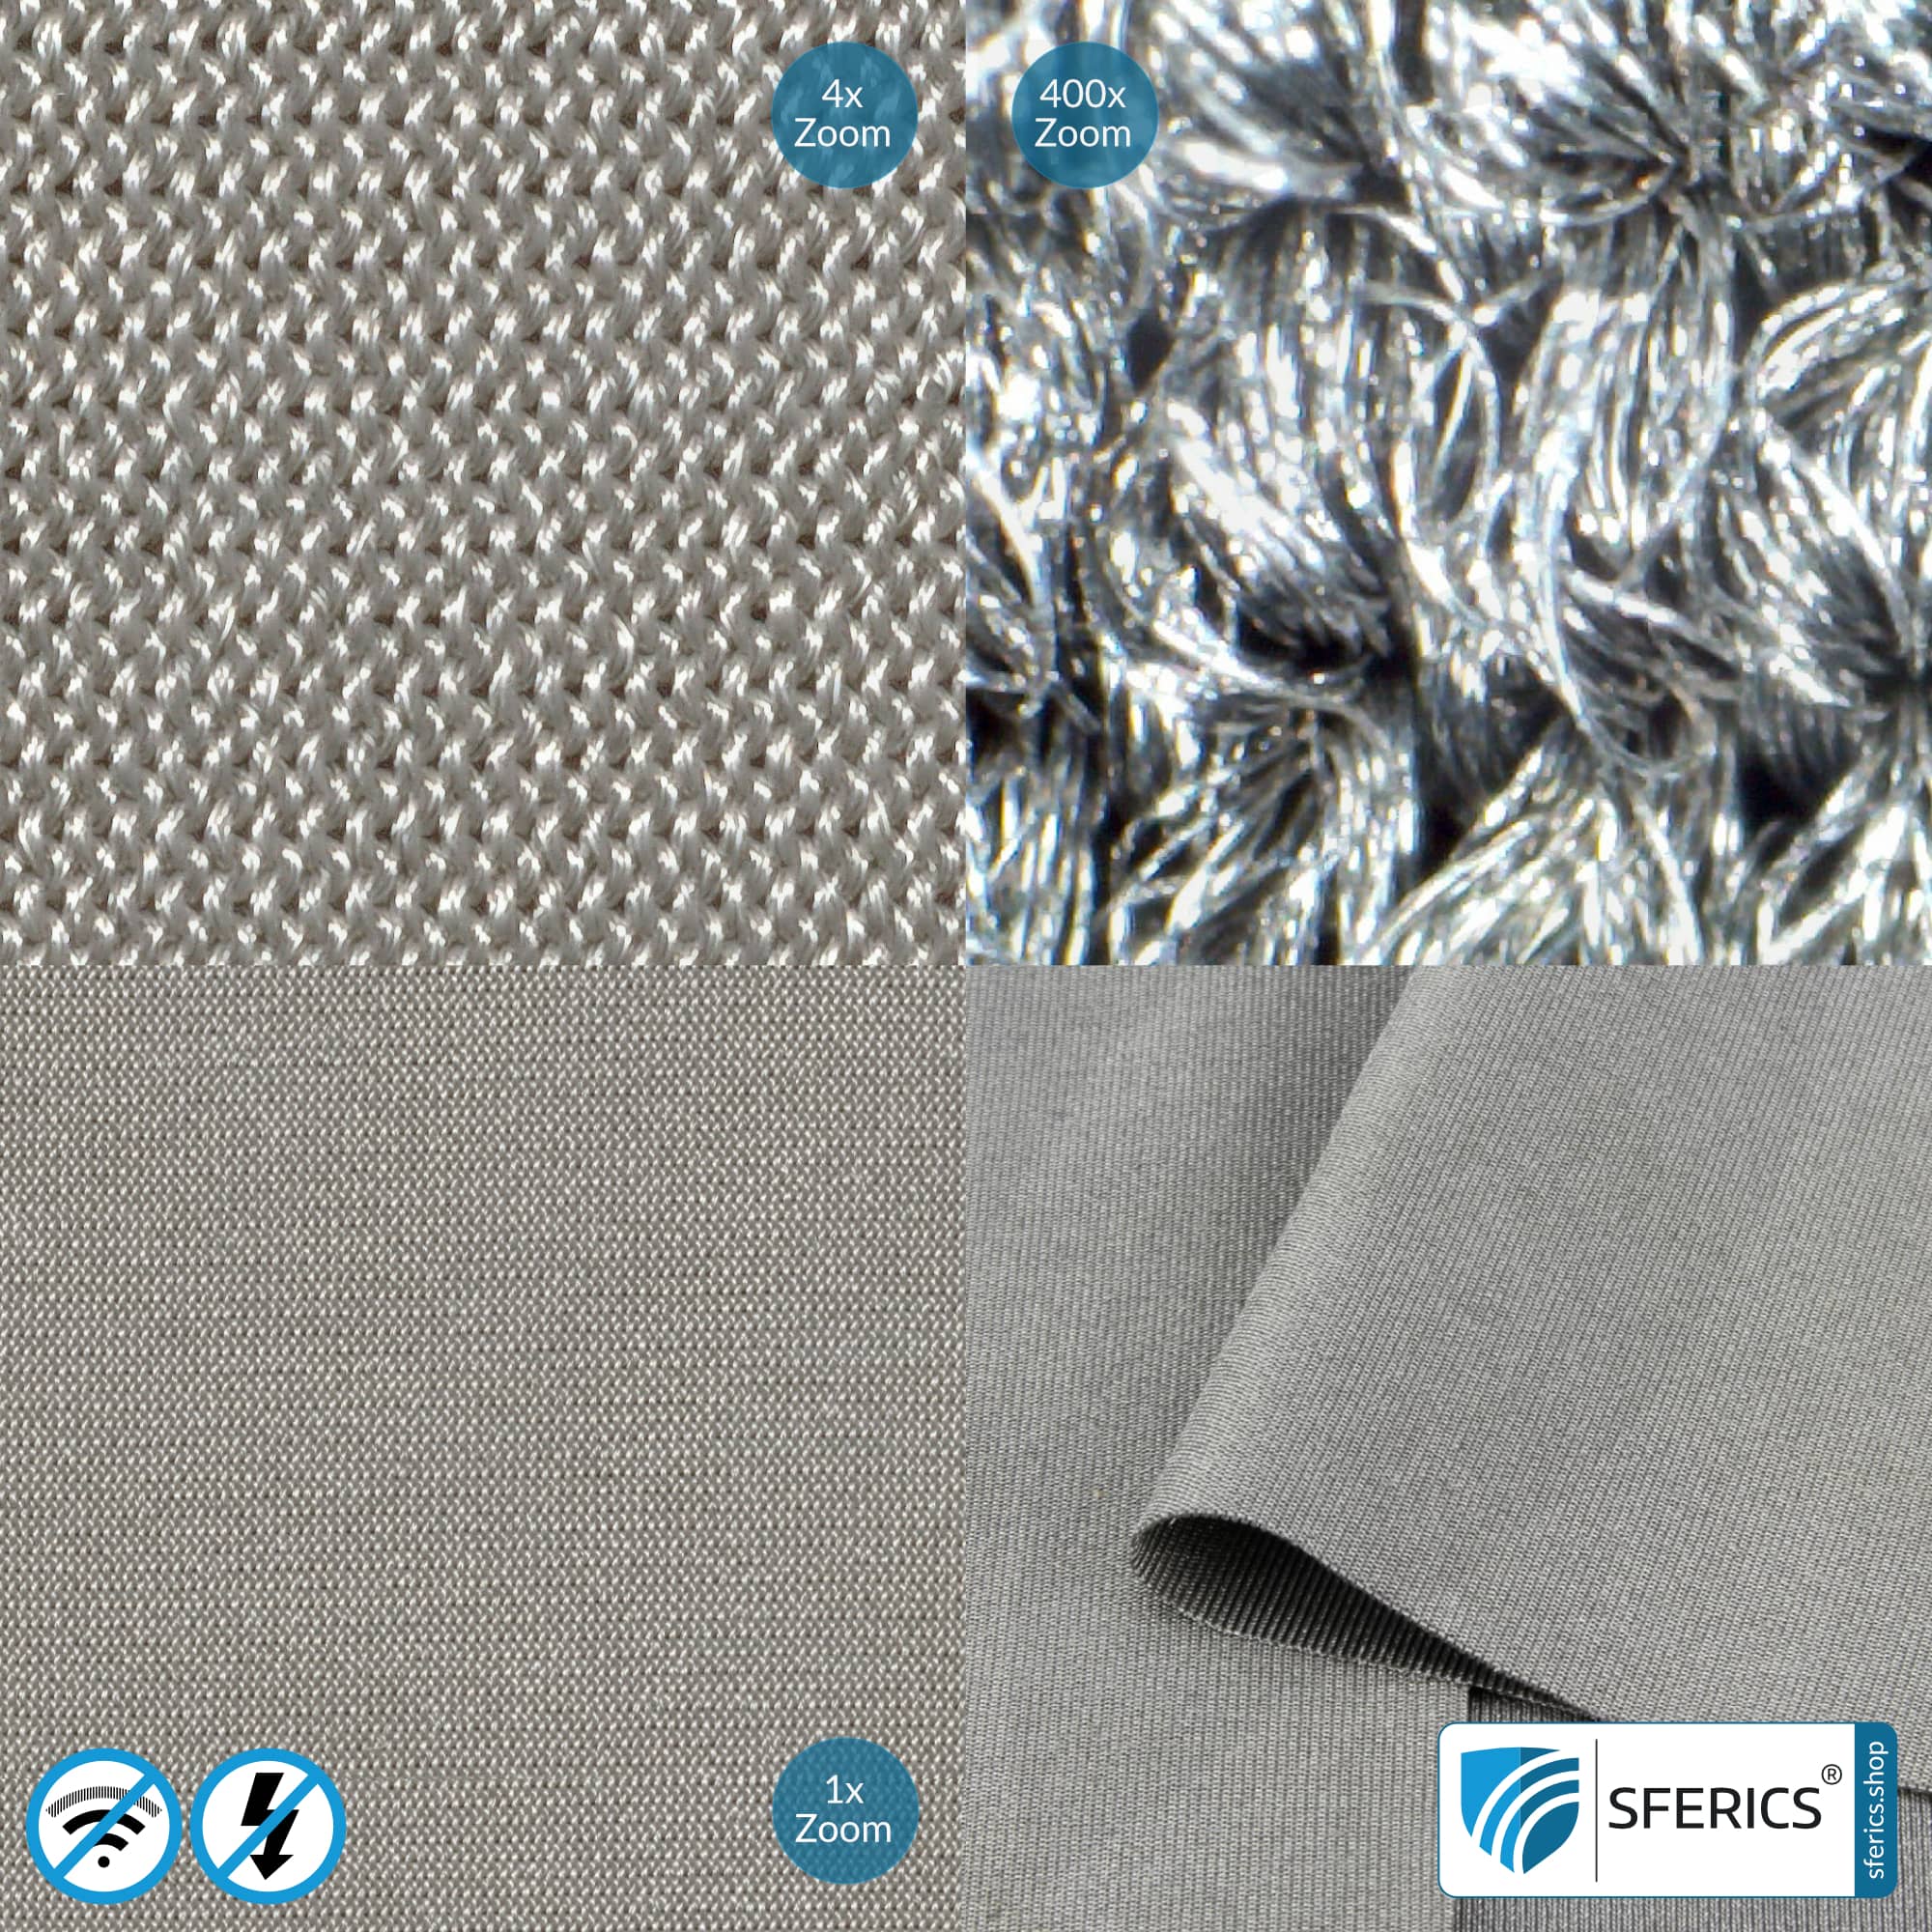 SILVER ELASTIC shielding fabric | ideal for production of clothing | RF screening attenuation against electrosmog up to 51 dB | TÜV-SÜD quality tested. Effective against 5G!